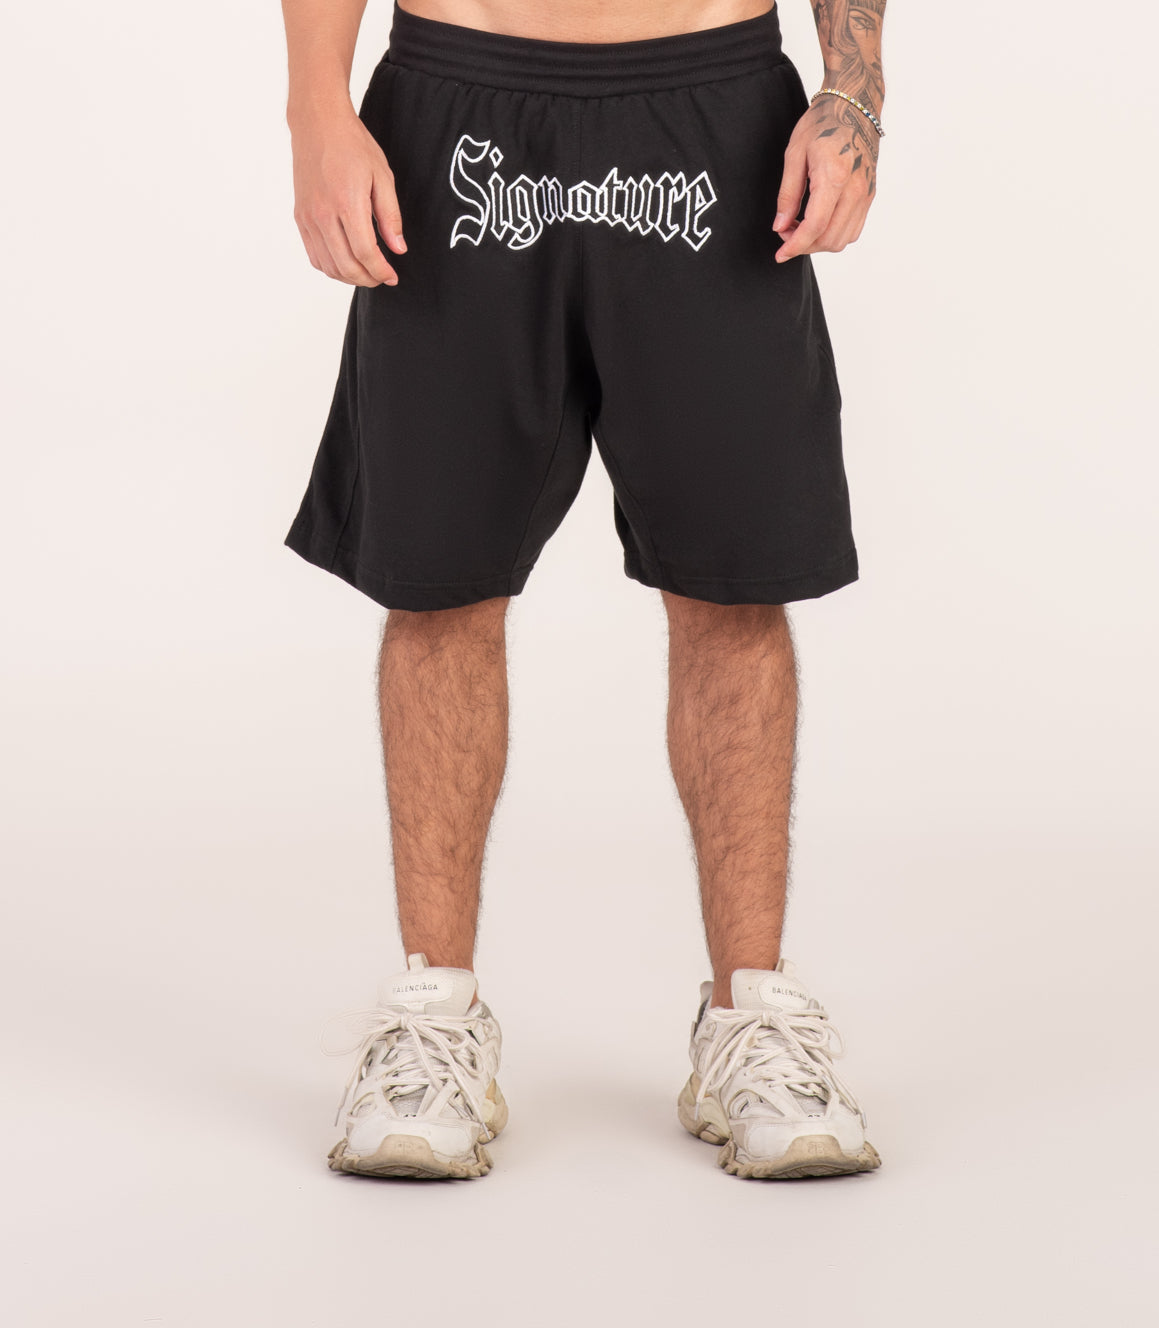 Signature Embroidered Shorts